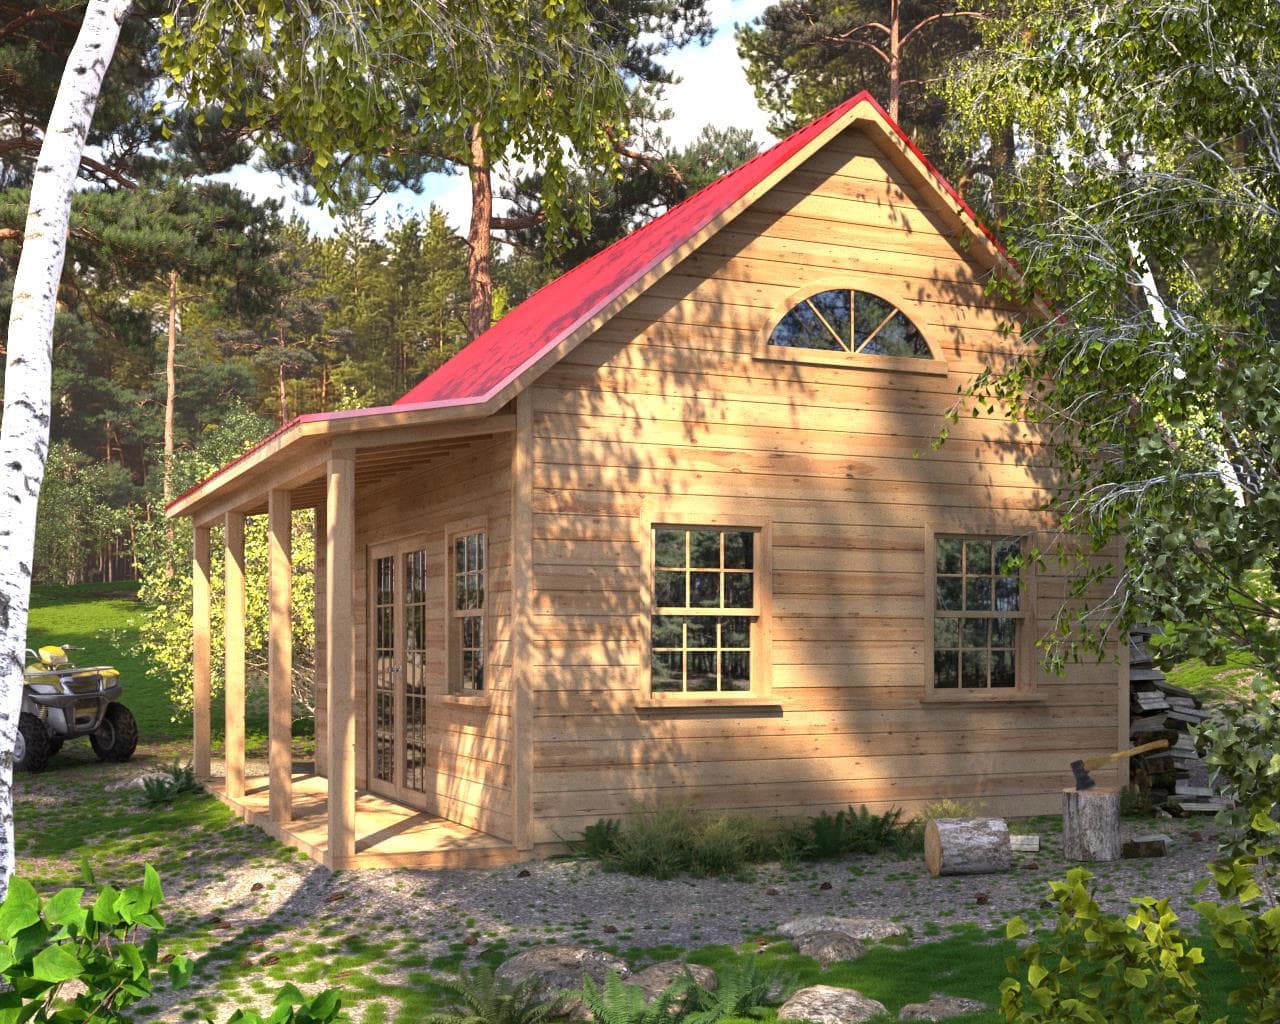 Invermere 16x20 cabin with arch window in Toronto Ontario. ID number 6821-2